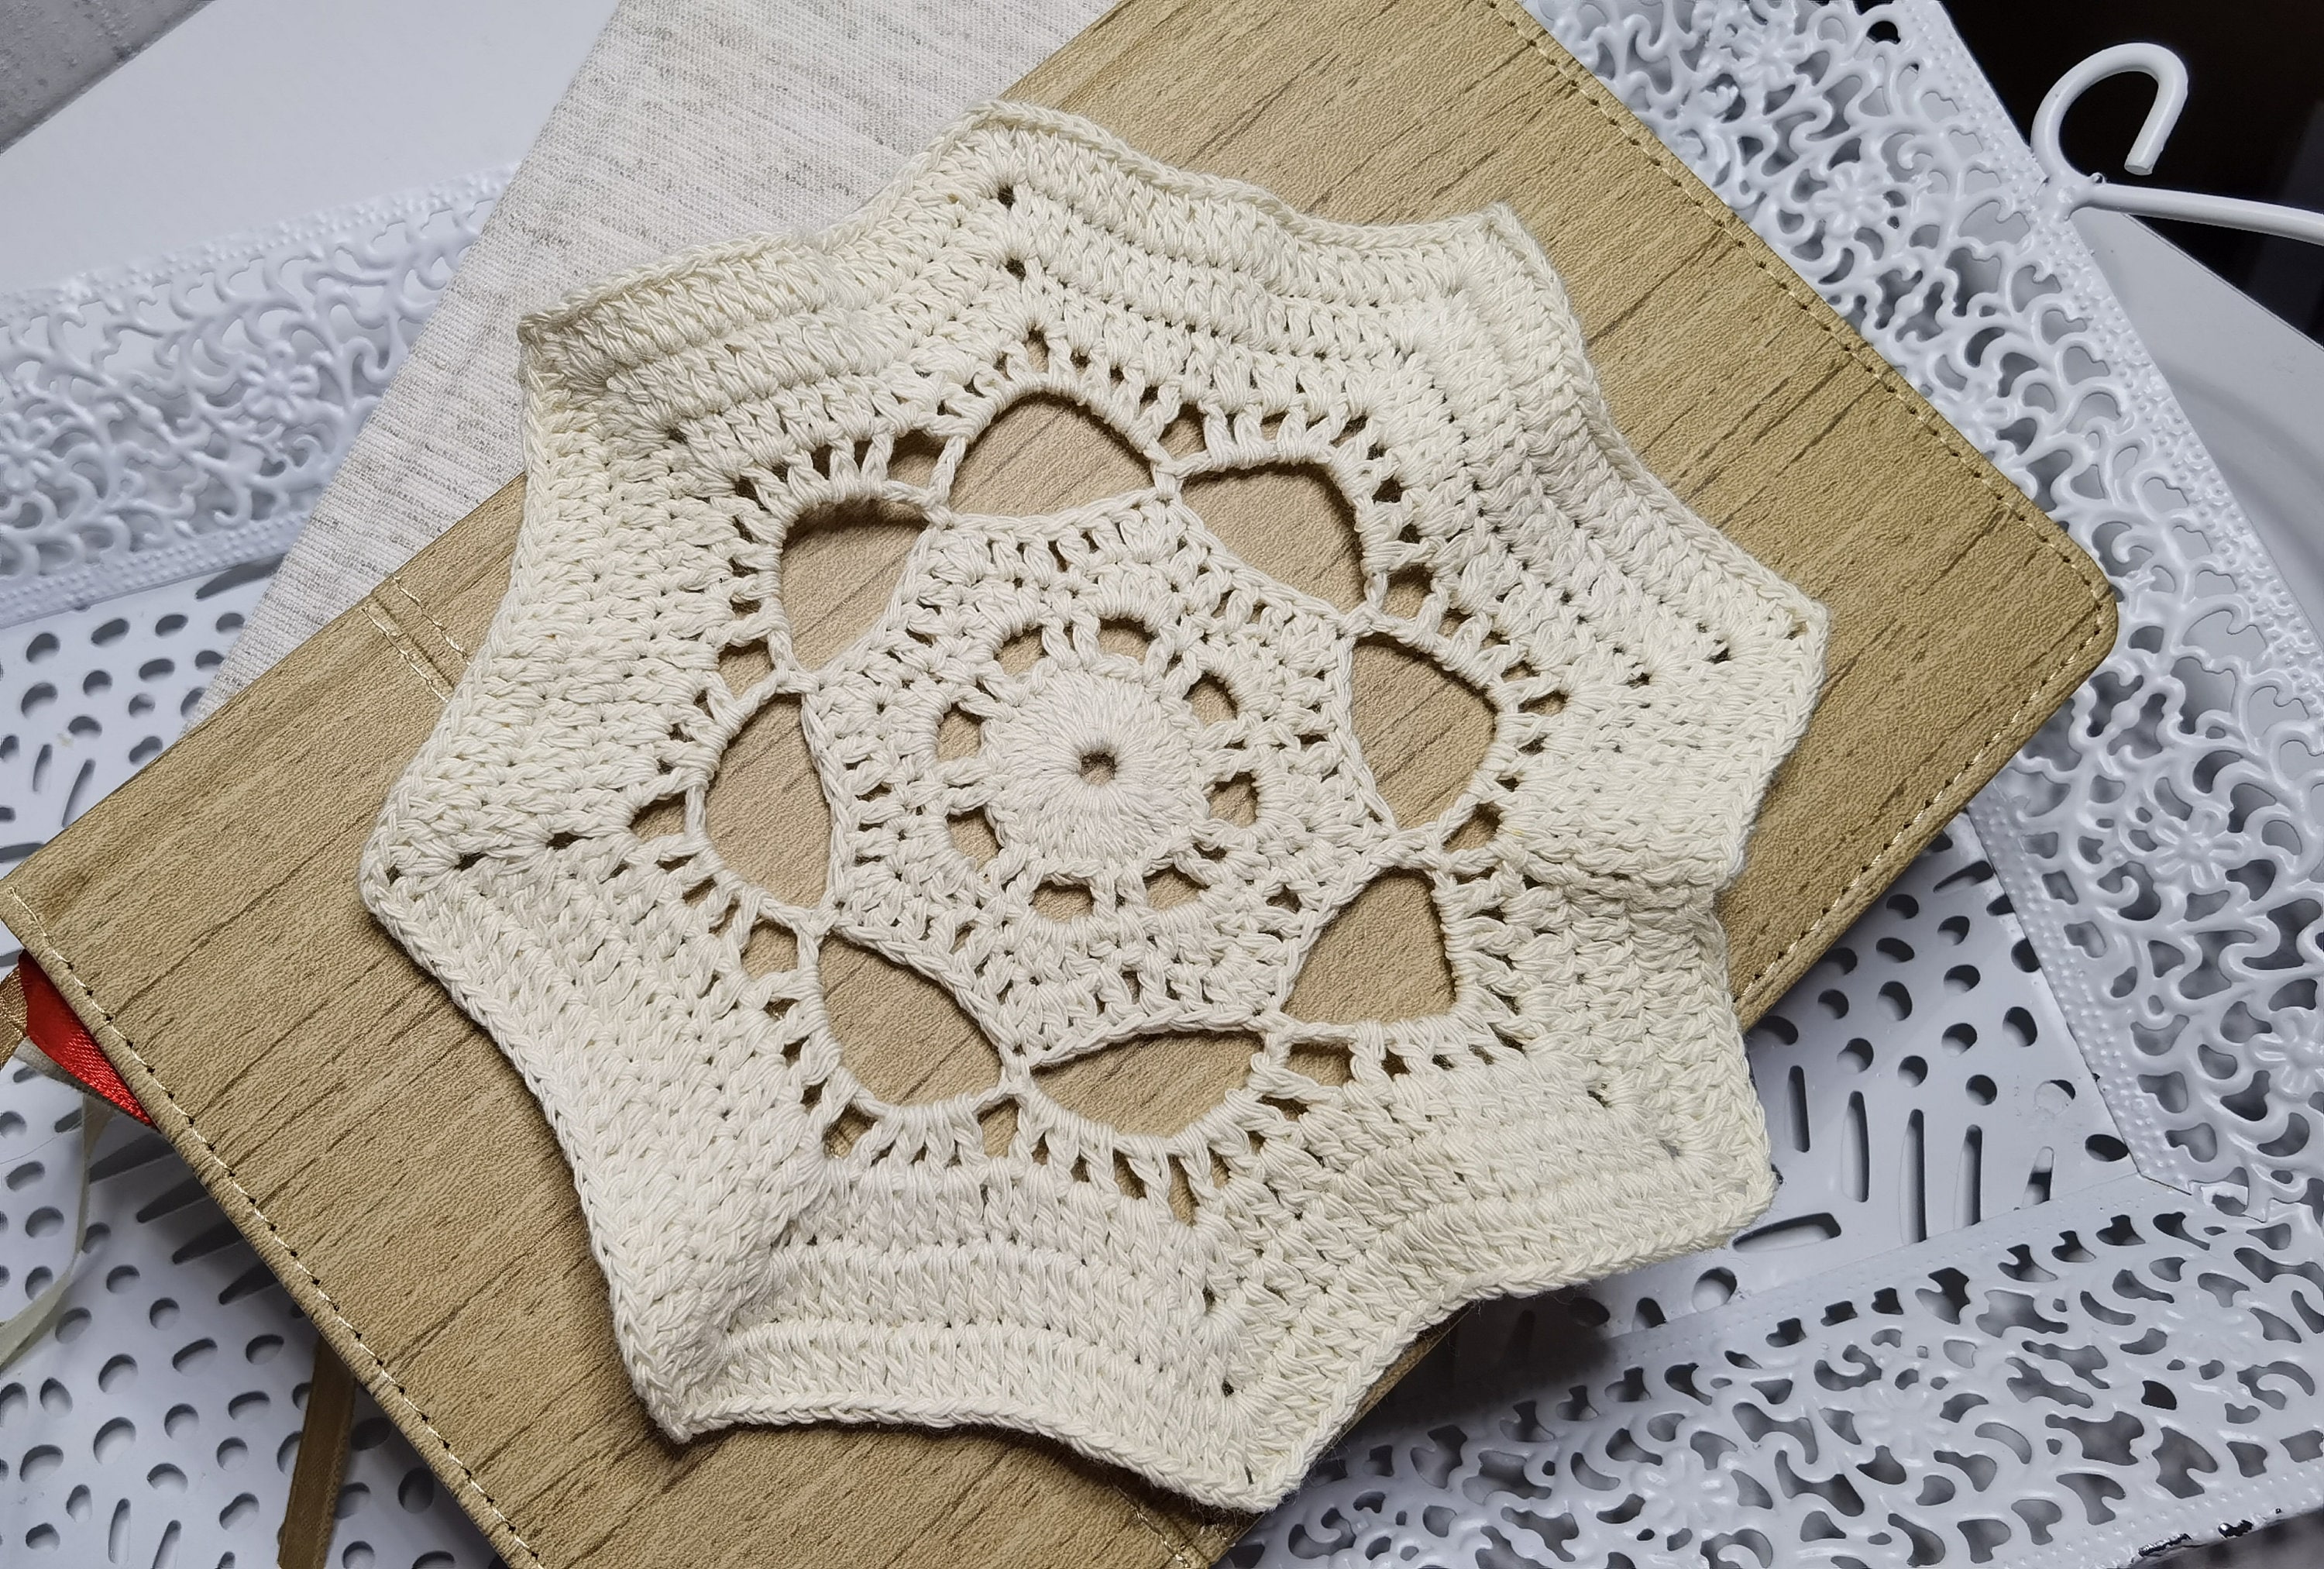 Ritual Small Doily Craft Doilies Home Decor Interior Doilies Lacy Lace Fashion Napkin Crocheted Coaster Snowflake Pink Miniature Appliques